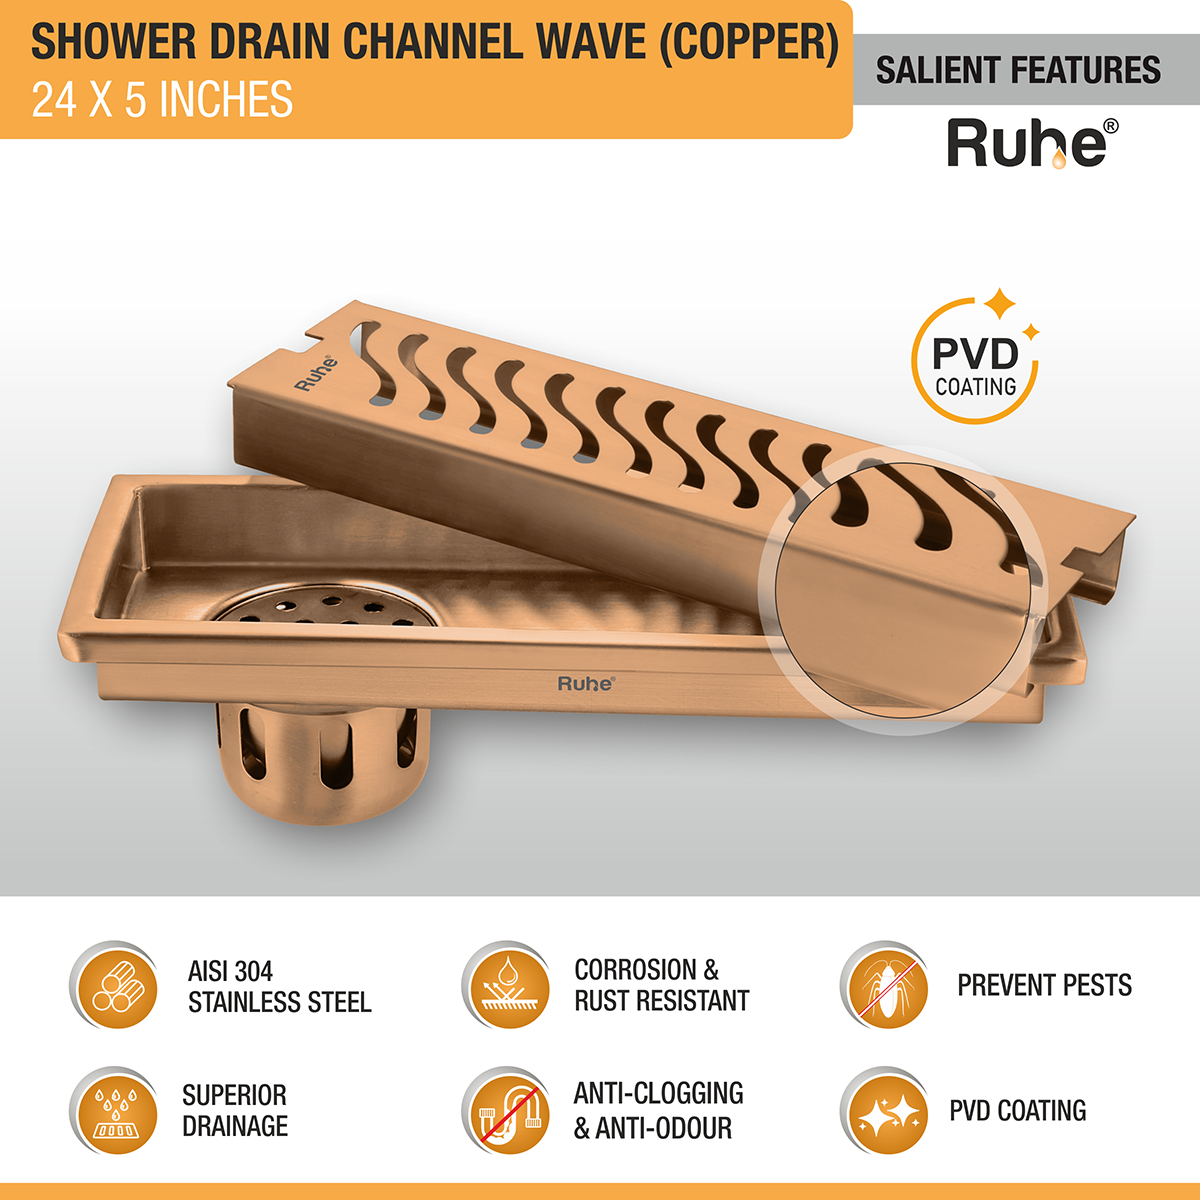 Wave Shower Drain Channel (24 x 5 Inches) ROSE GOLD/ANTIQUE COPPER features